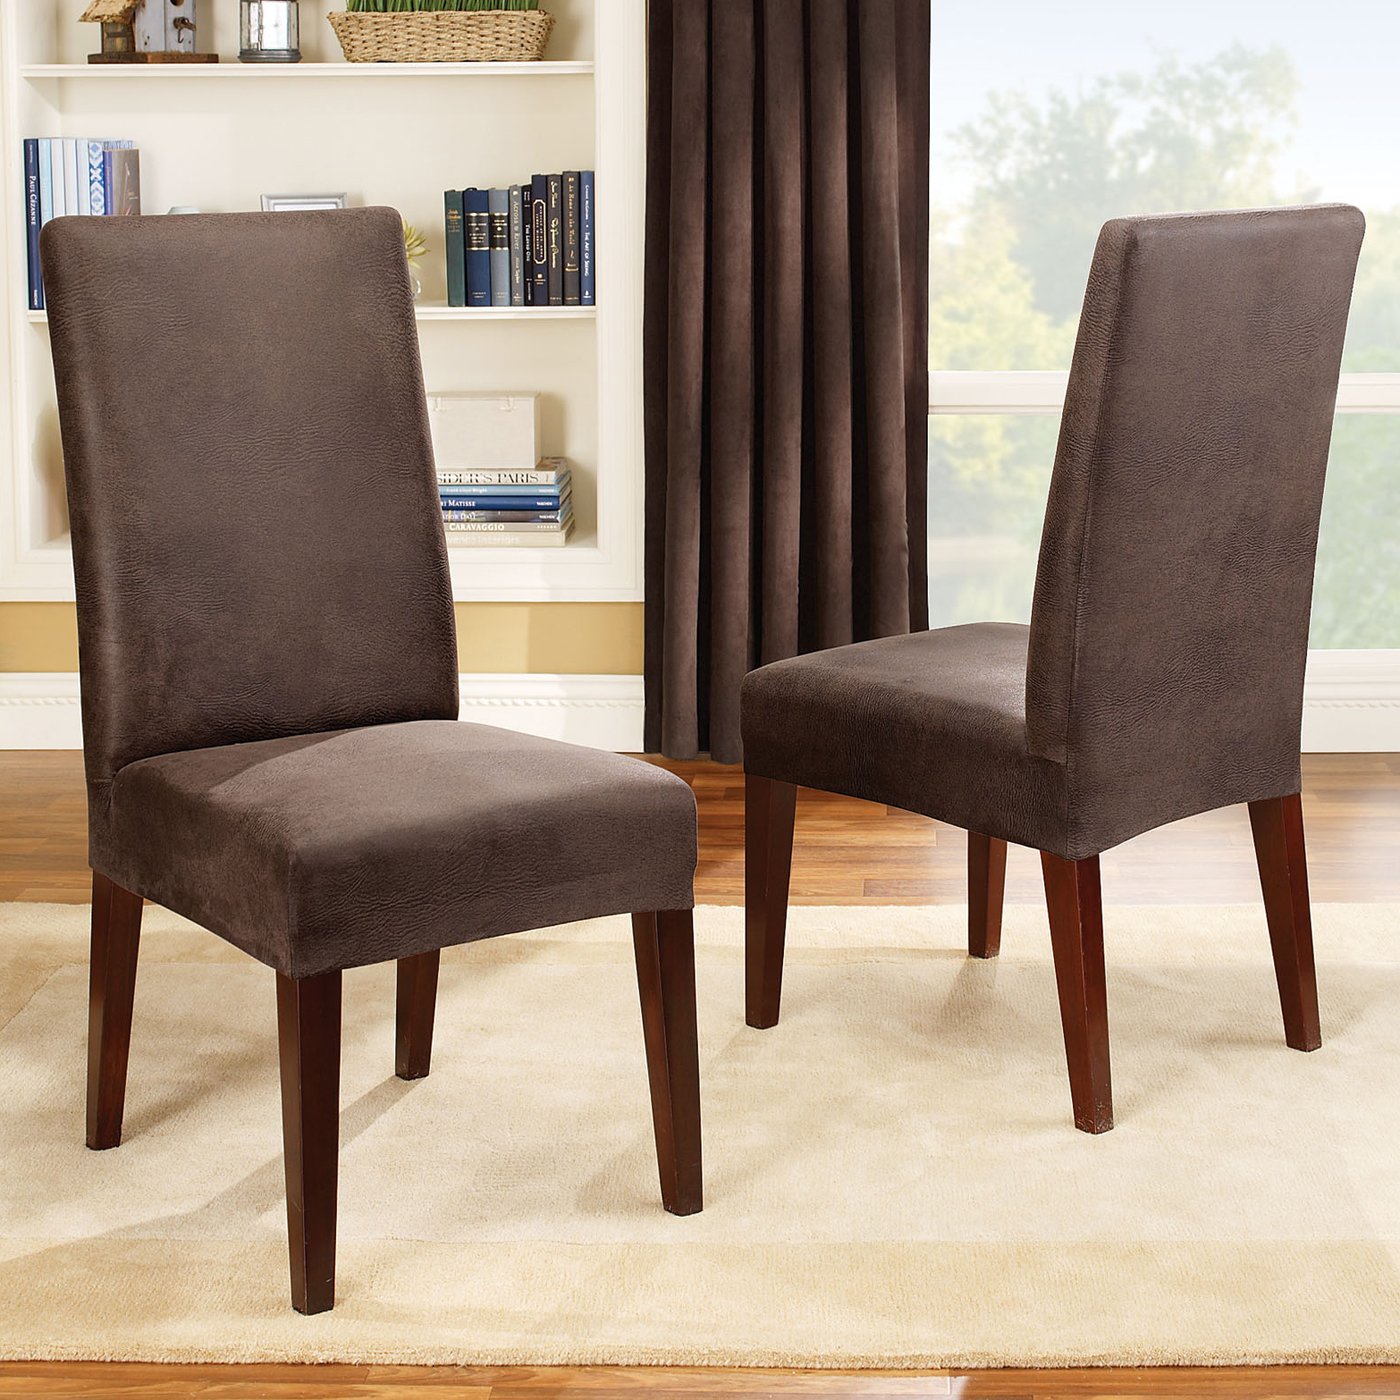 slipcover dining chairs photo - 2